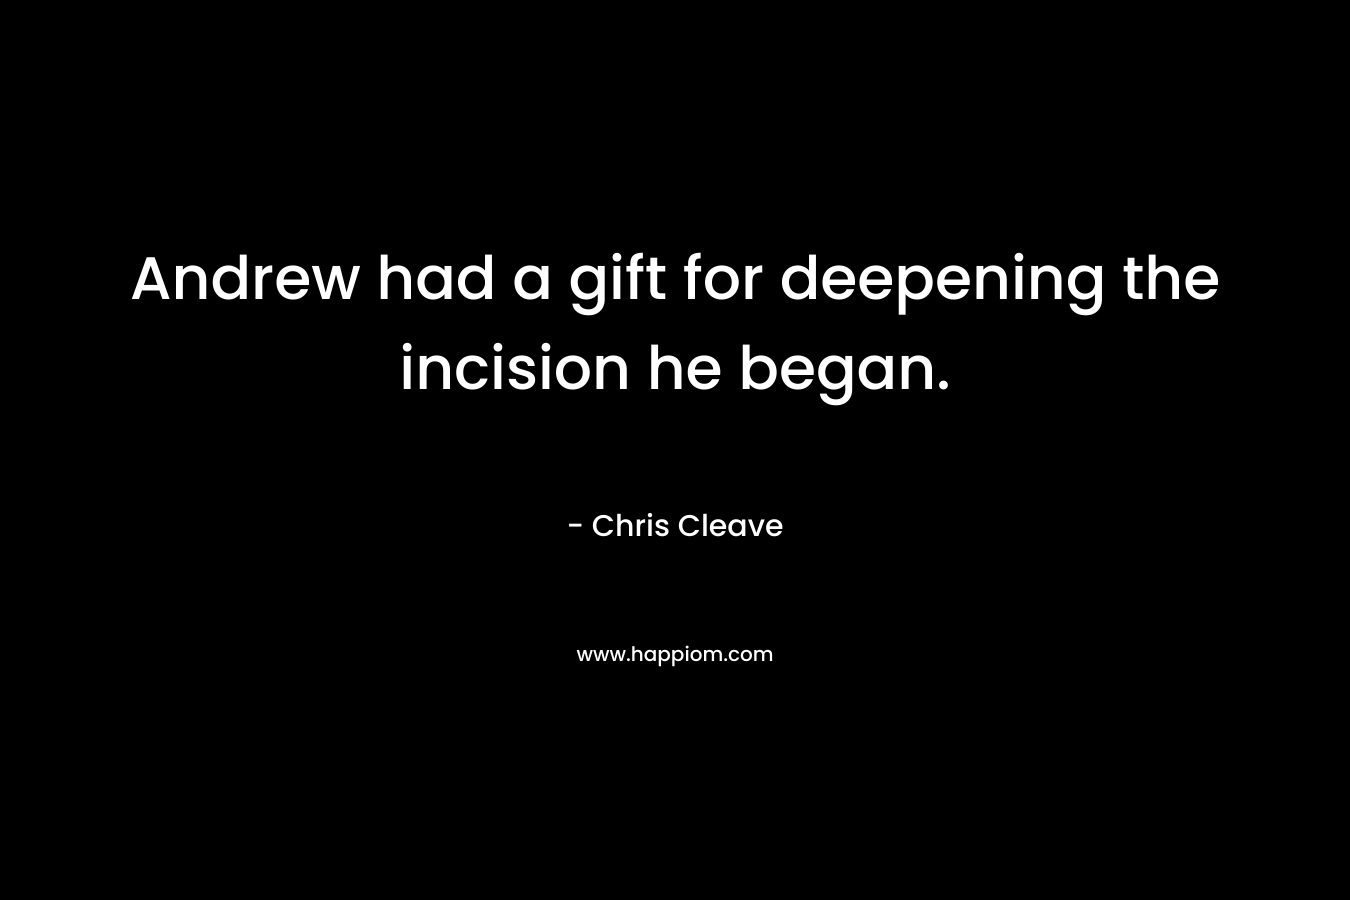 Andrew had a gift for deepening the incision he began. – Chris Cleave